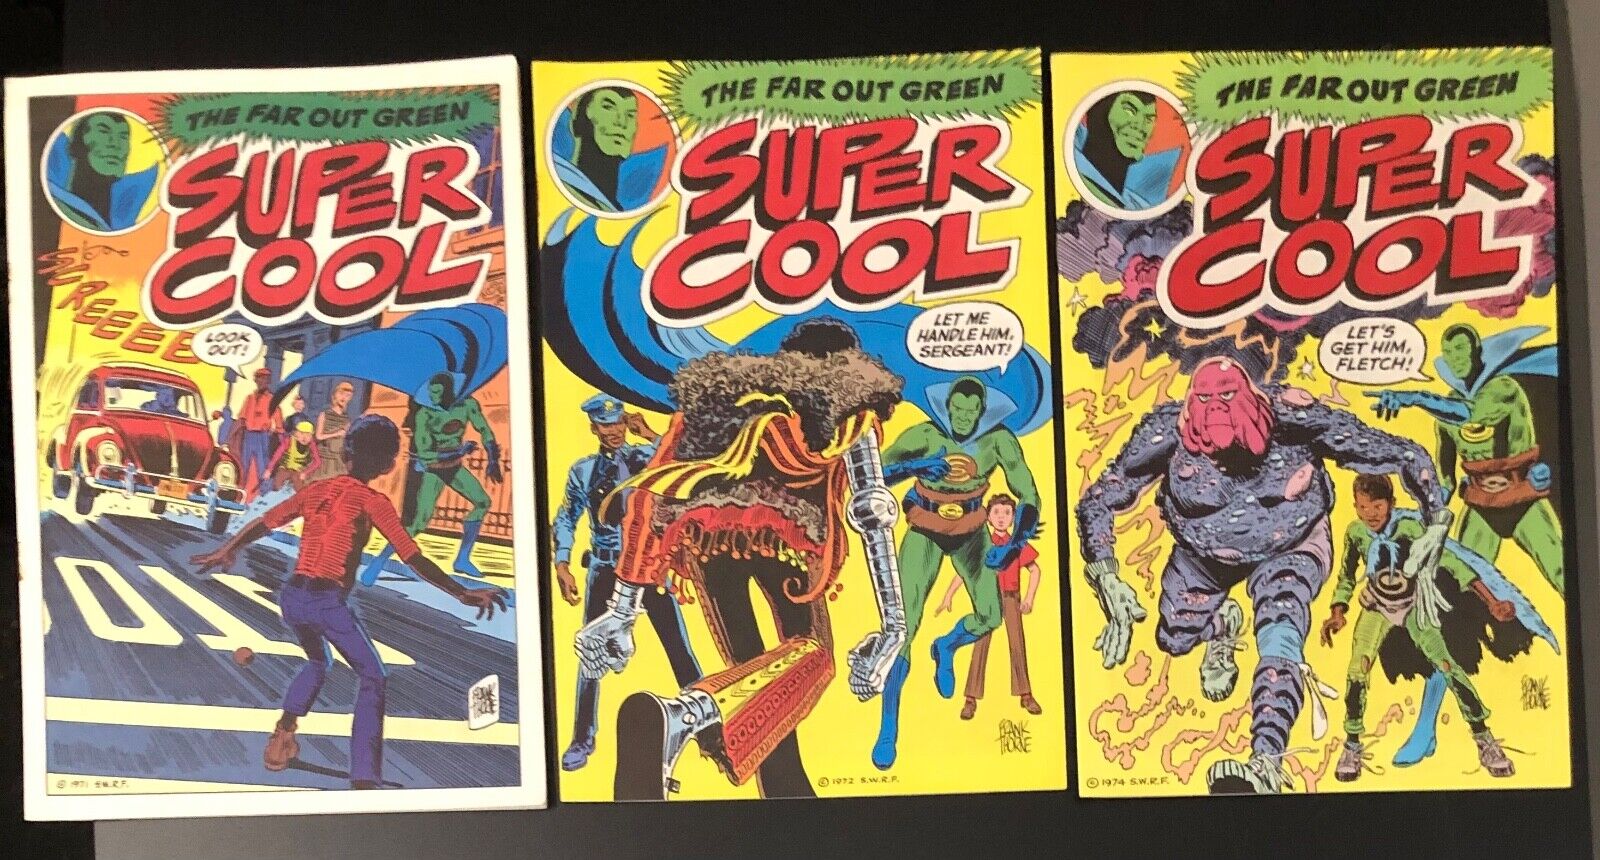 SIGNED FAR OUT GREEN SUPER COOL #1 #2 #4 FRANK THORNE of Red Sonja Marvel Unread